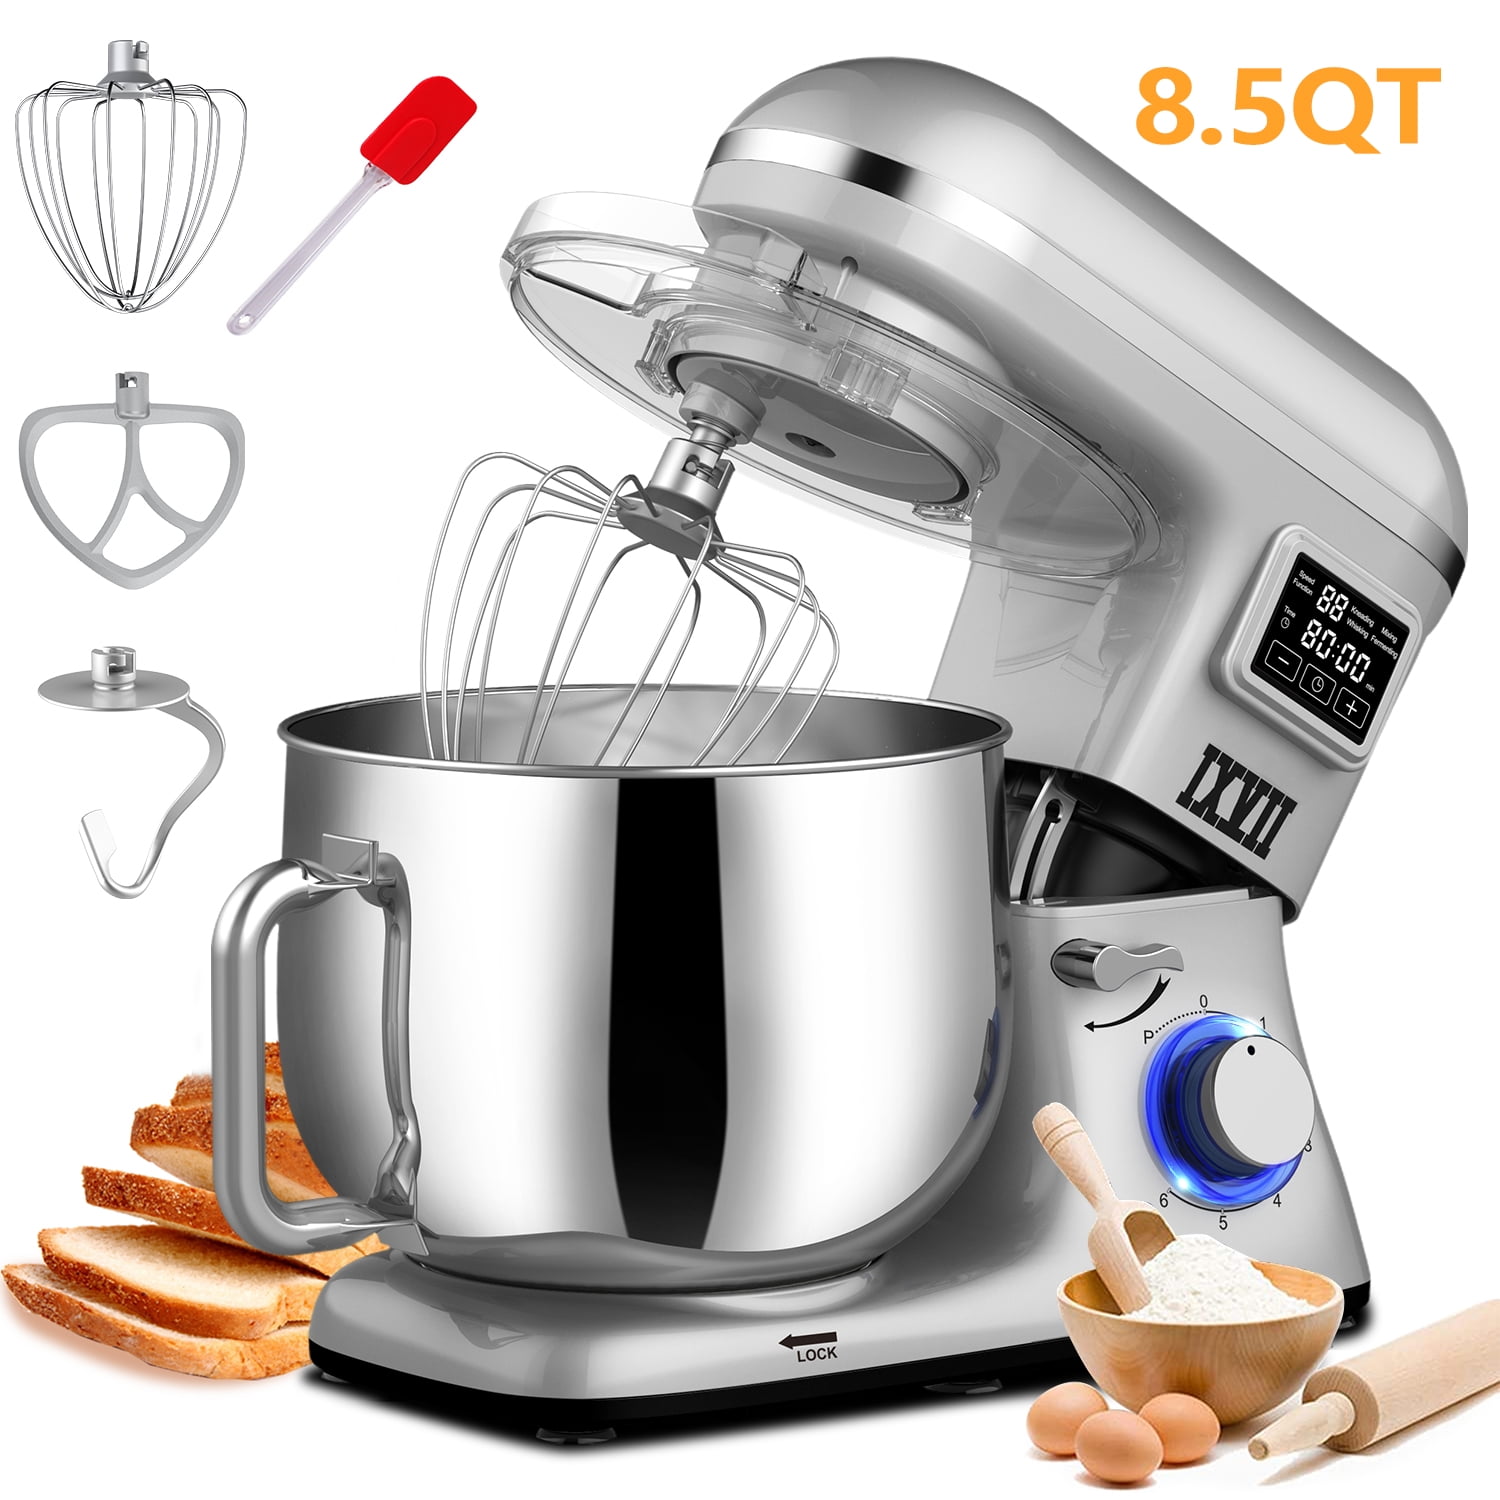 6 Speed Home Stand Mixer, Electric Cake Mixer with LCD Display Timer, 660W  Tilt-Head Kitchen Mixer with Stainless Steel Bowl, Dough Hook, Whisk, 